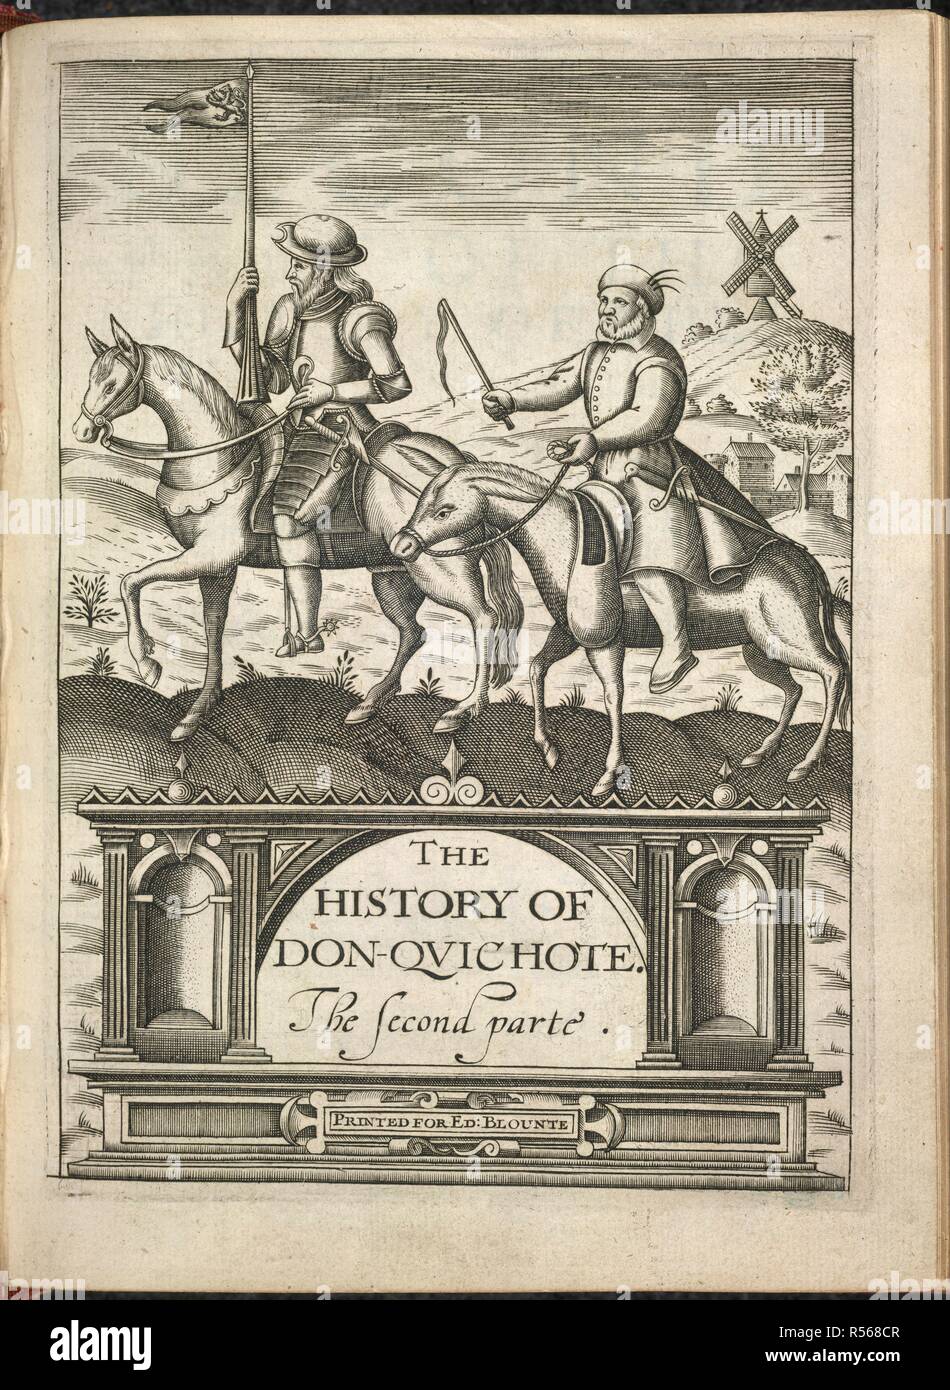 Illustrated title page showing Don Quixote and Sancho Panza. The History of Don-Quichote. The first parte. (The Second Part of the History of the Valorous and Witty Knight-Errant, Don Quixote of the Mancha. Written in Spanish by Michael Ceruantes: And now Translated into English].. Blounte: London, 1620. Source: G.10187.(2), title page. Language: English. Author: Cervantes (Saavedra), Miguel de. Stock Photo